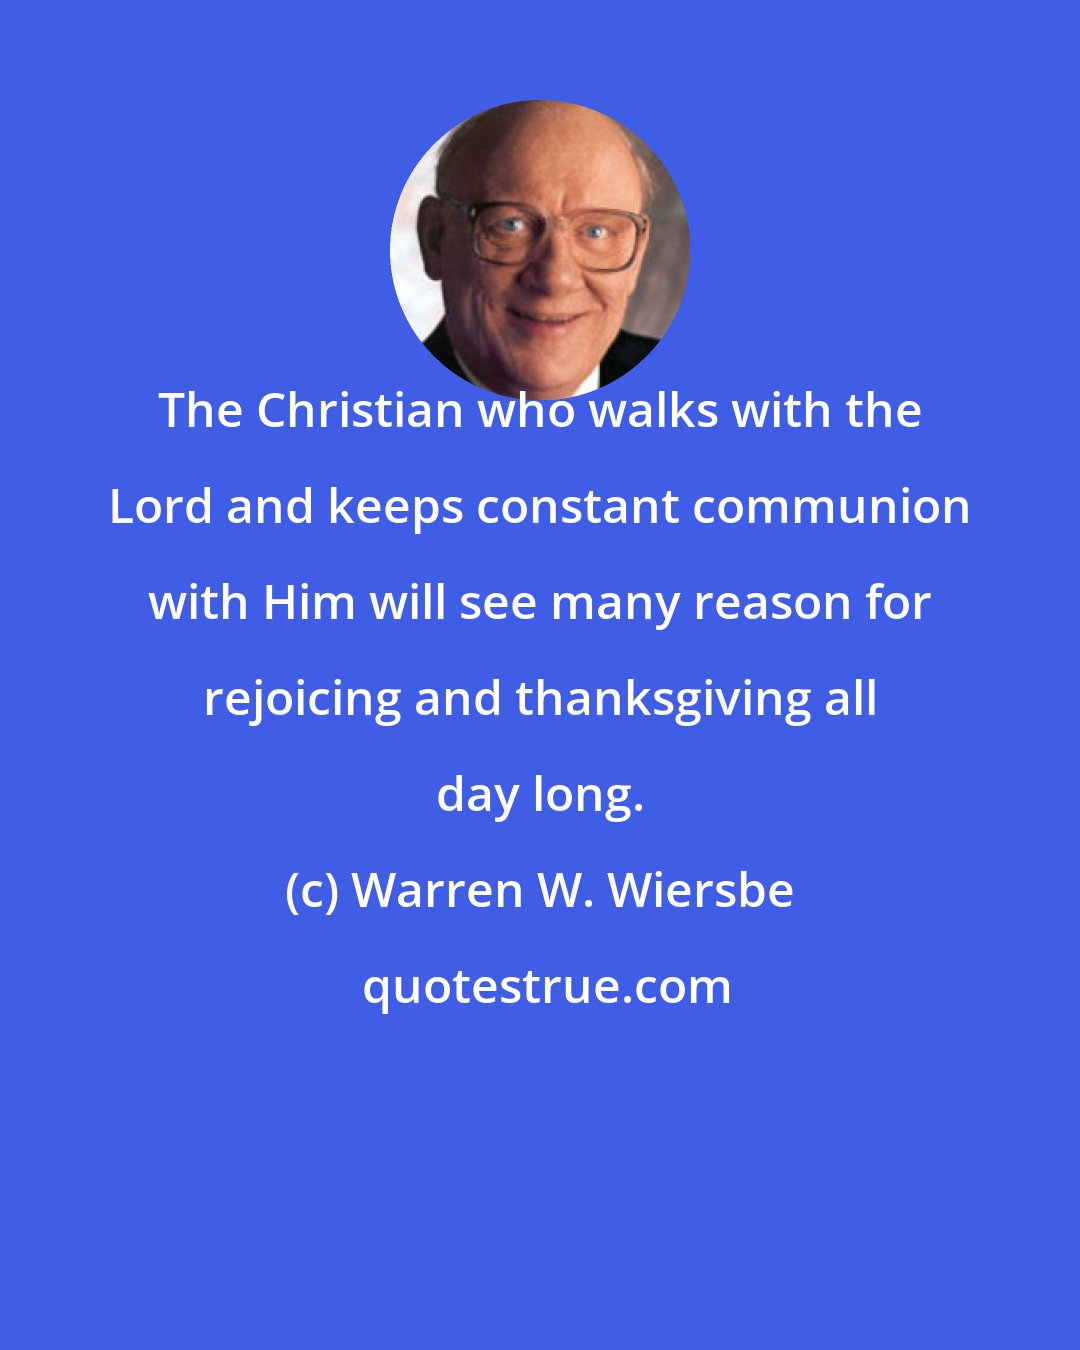 Warren W. Wiersbe: The Christian who walks with the Lord and keeps constant communion with Him will see many reason for rejoicing and thanksgiving all day long.